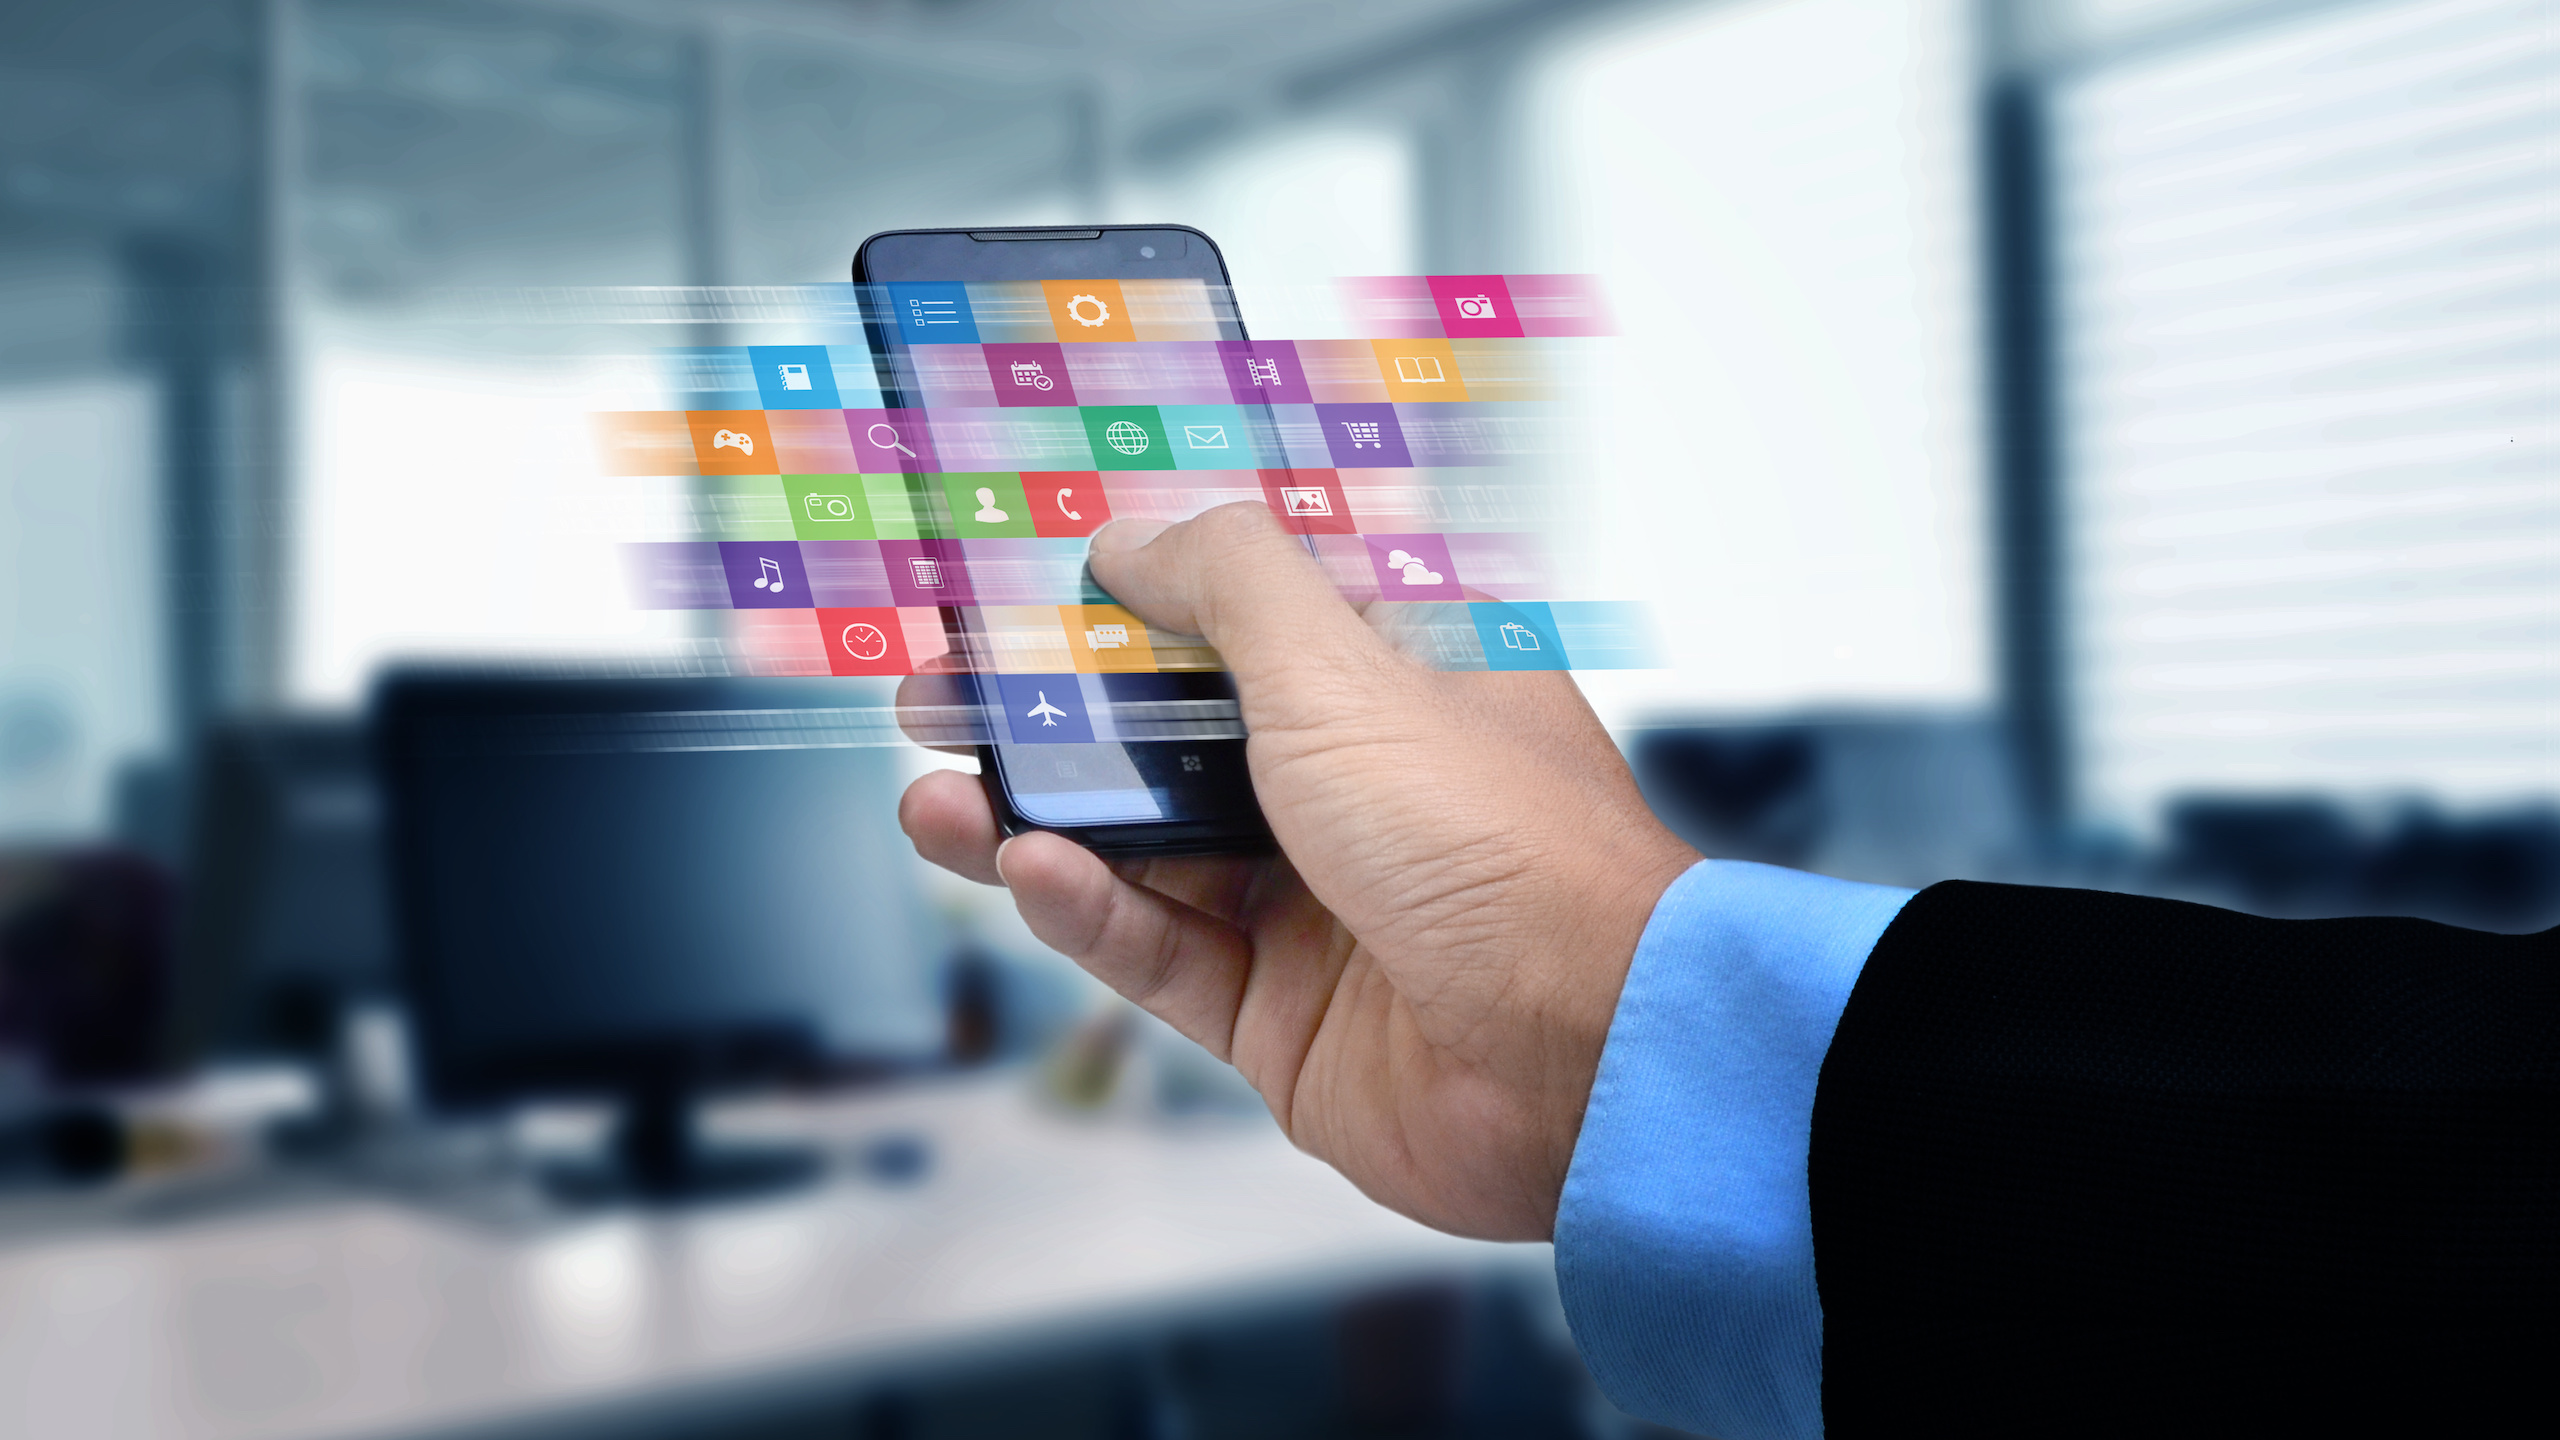 Featured image for “11 Apps To Make Your Business More Productive in 2019”